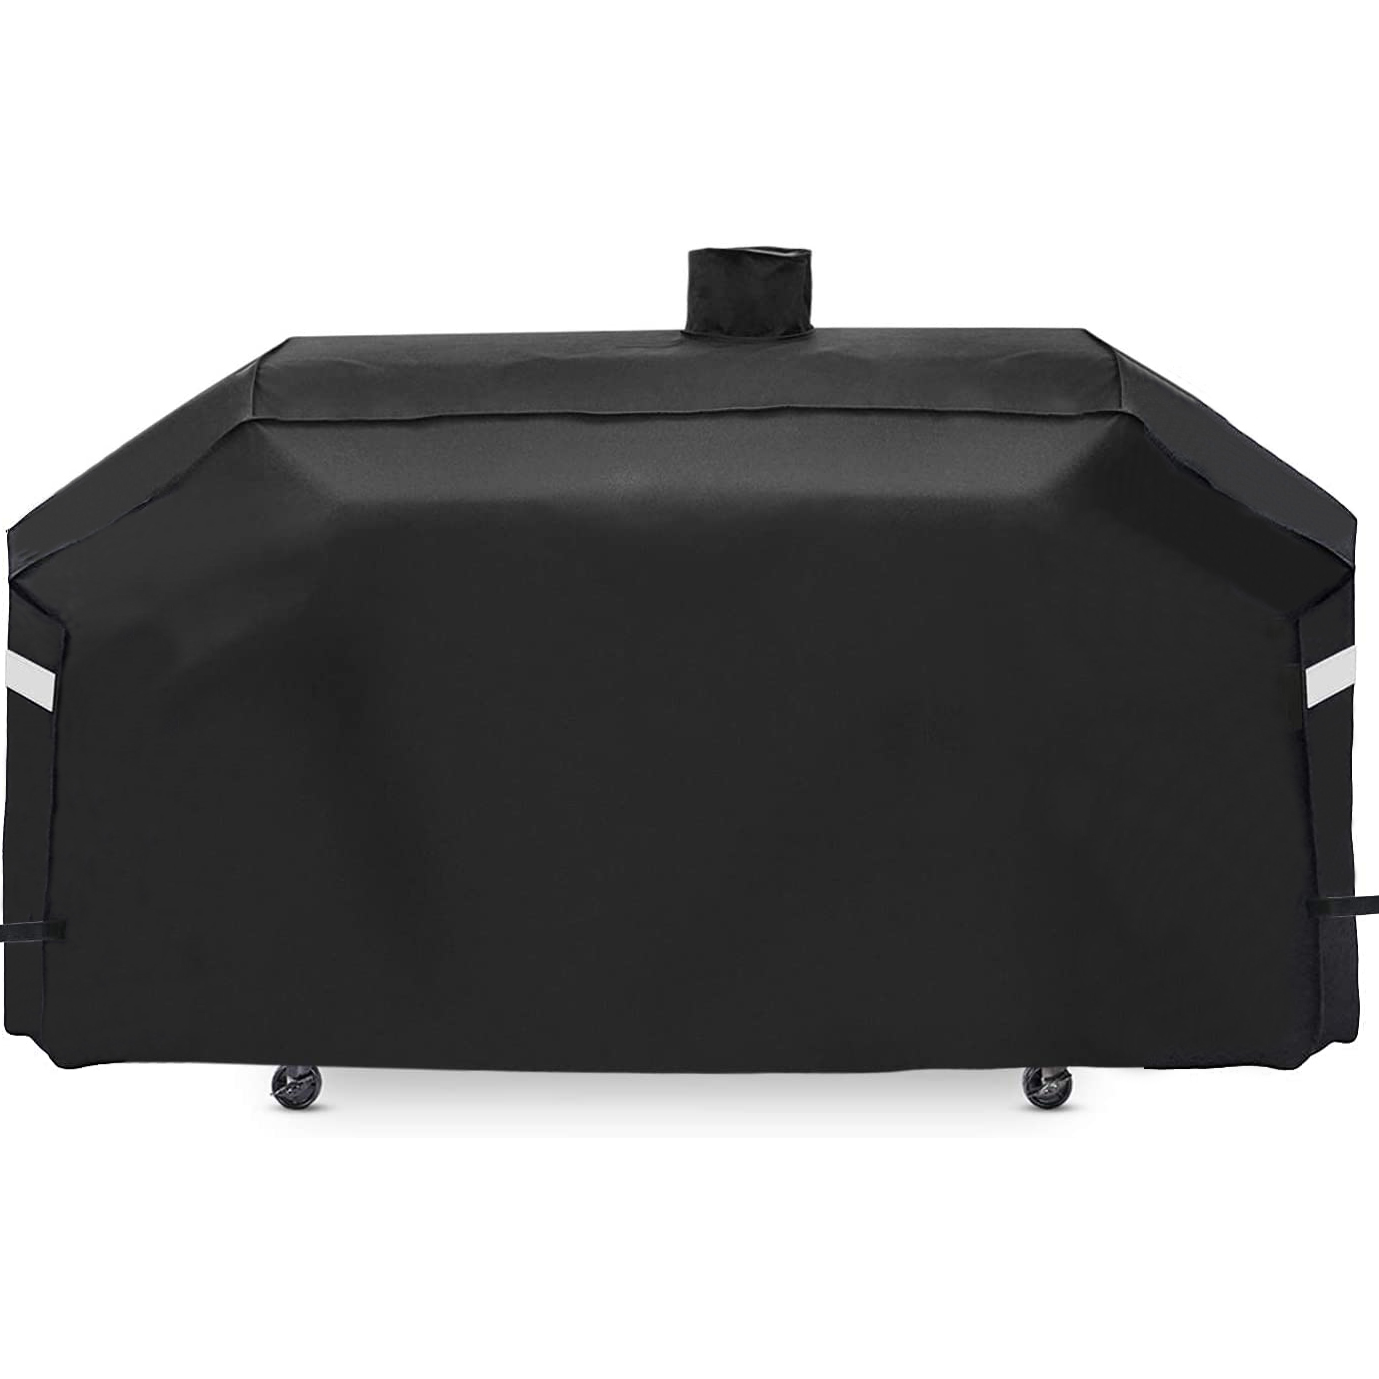 Grill Cover for Smoke Hollow 4 in 1 Combo Grill PS9900 PS9900-SY18 47180T, Pit Boss Memphis Ultimate Grill Cover, 79 Inches BBQ Barbecue Cover, All Weather Protection - image 1 of 3